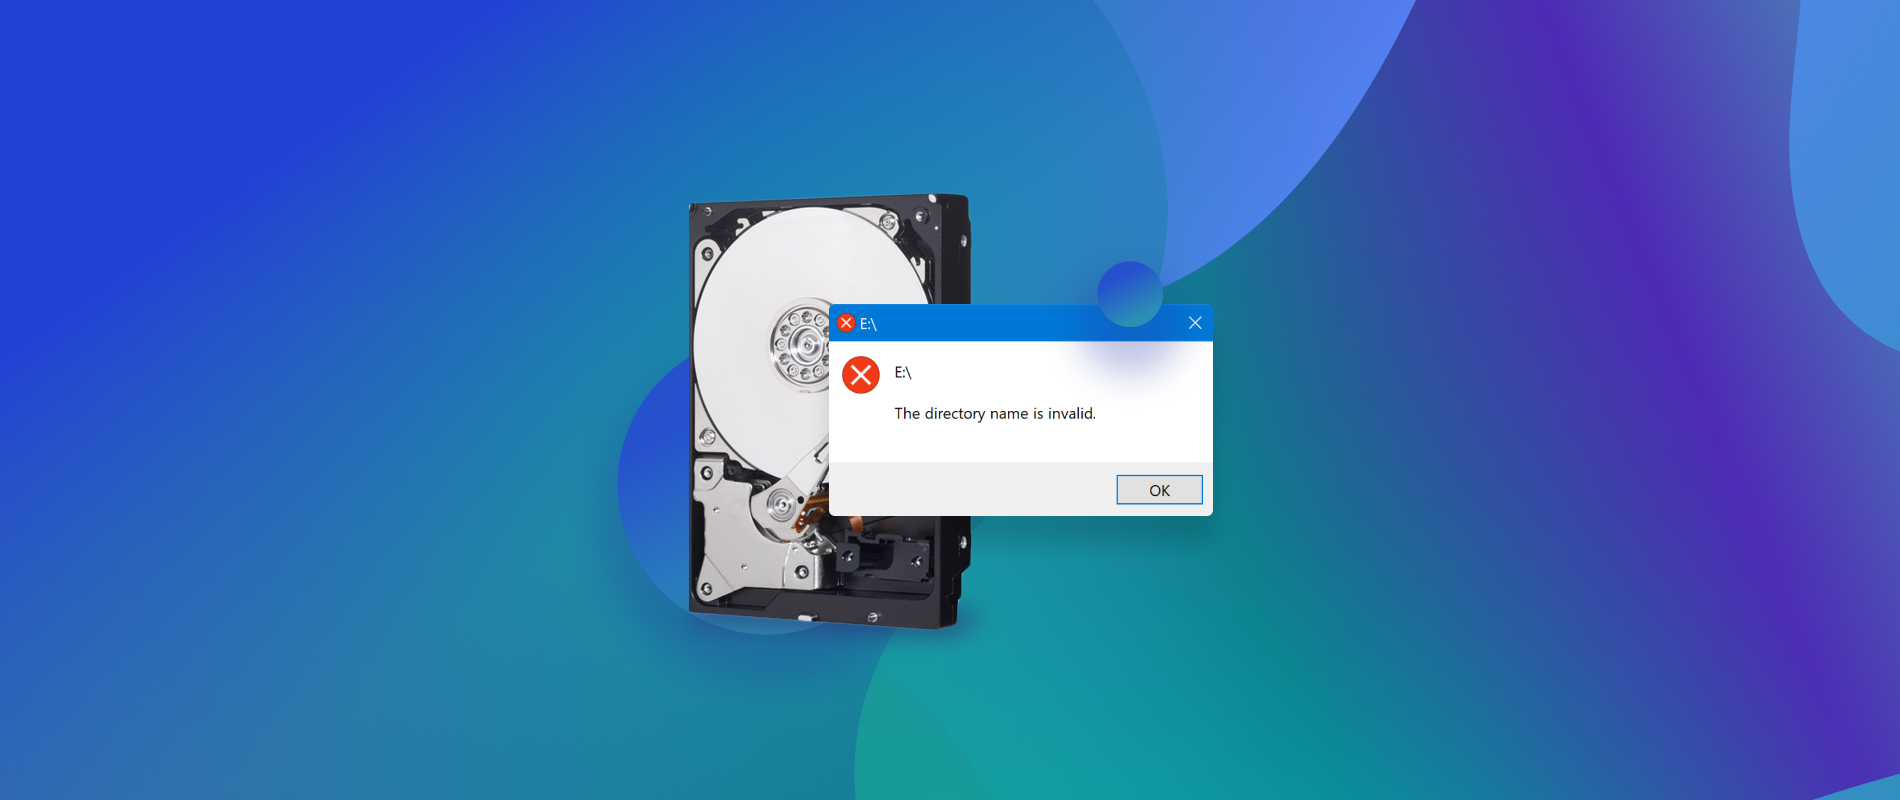 Windows will now scan the hard drive for corrupted files.